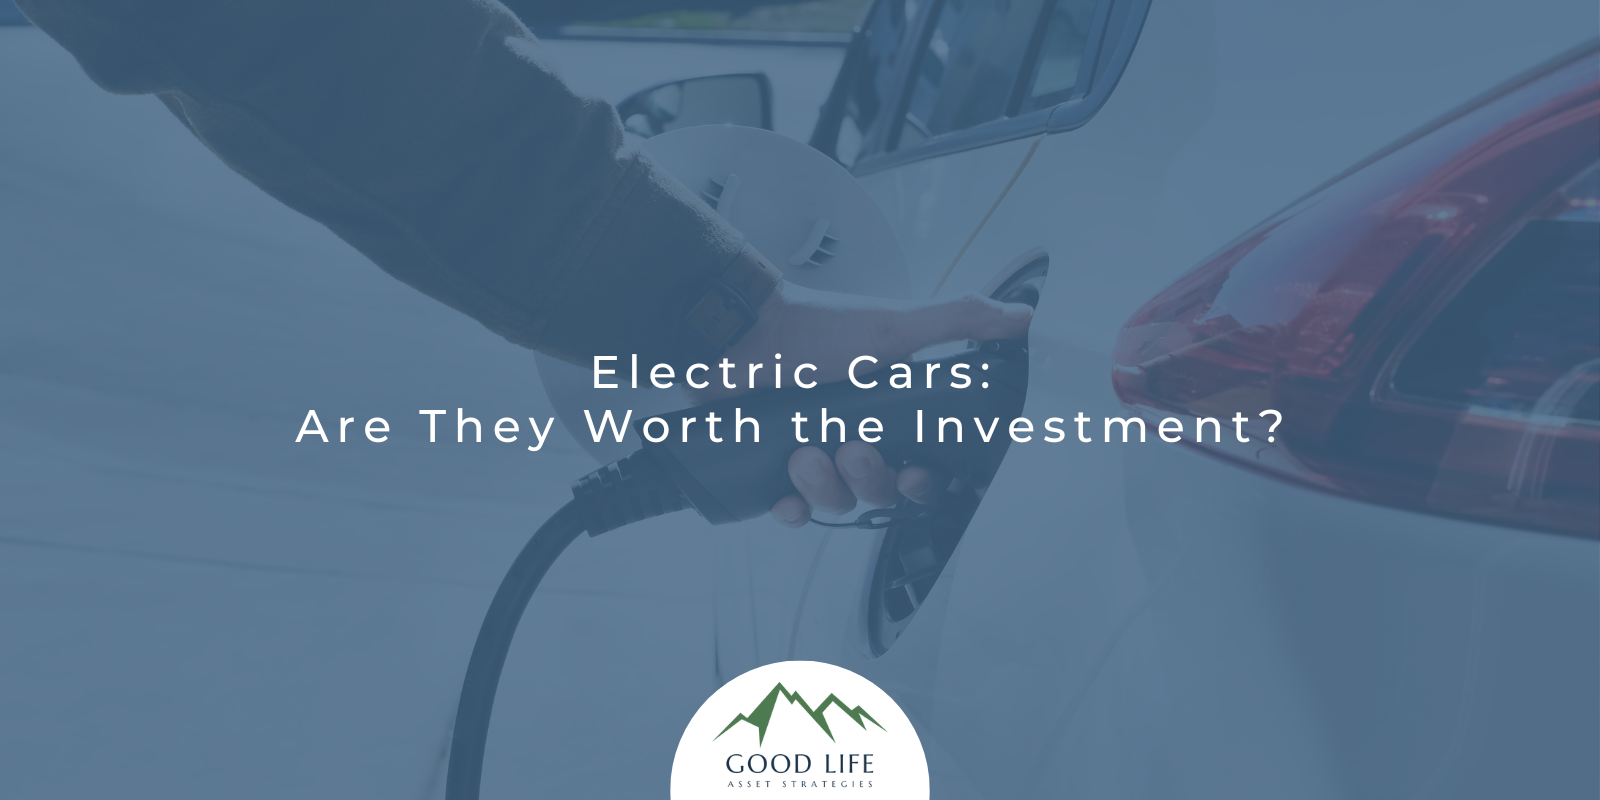 Electric Cars: Are They Worth the Investment?